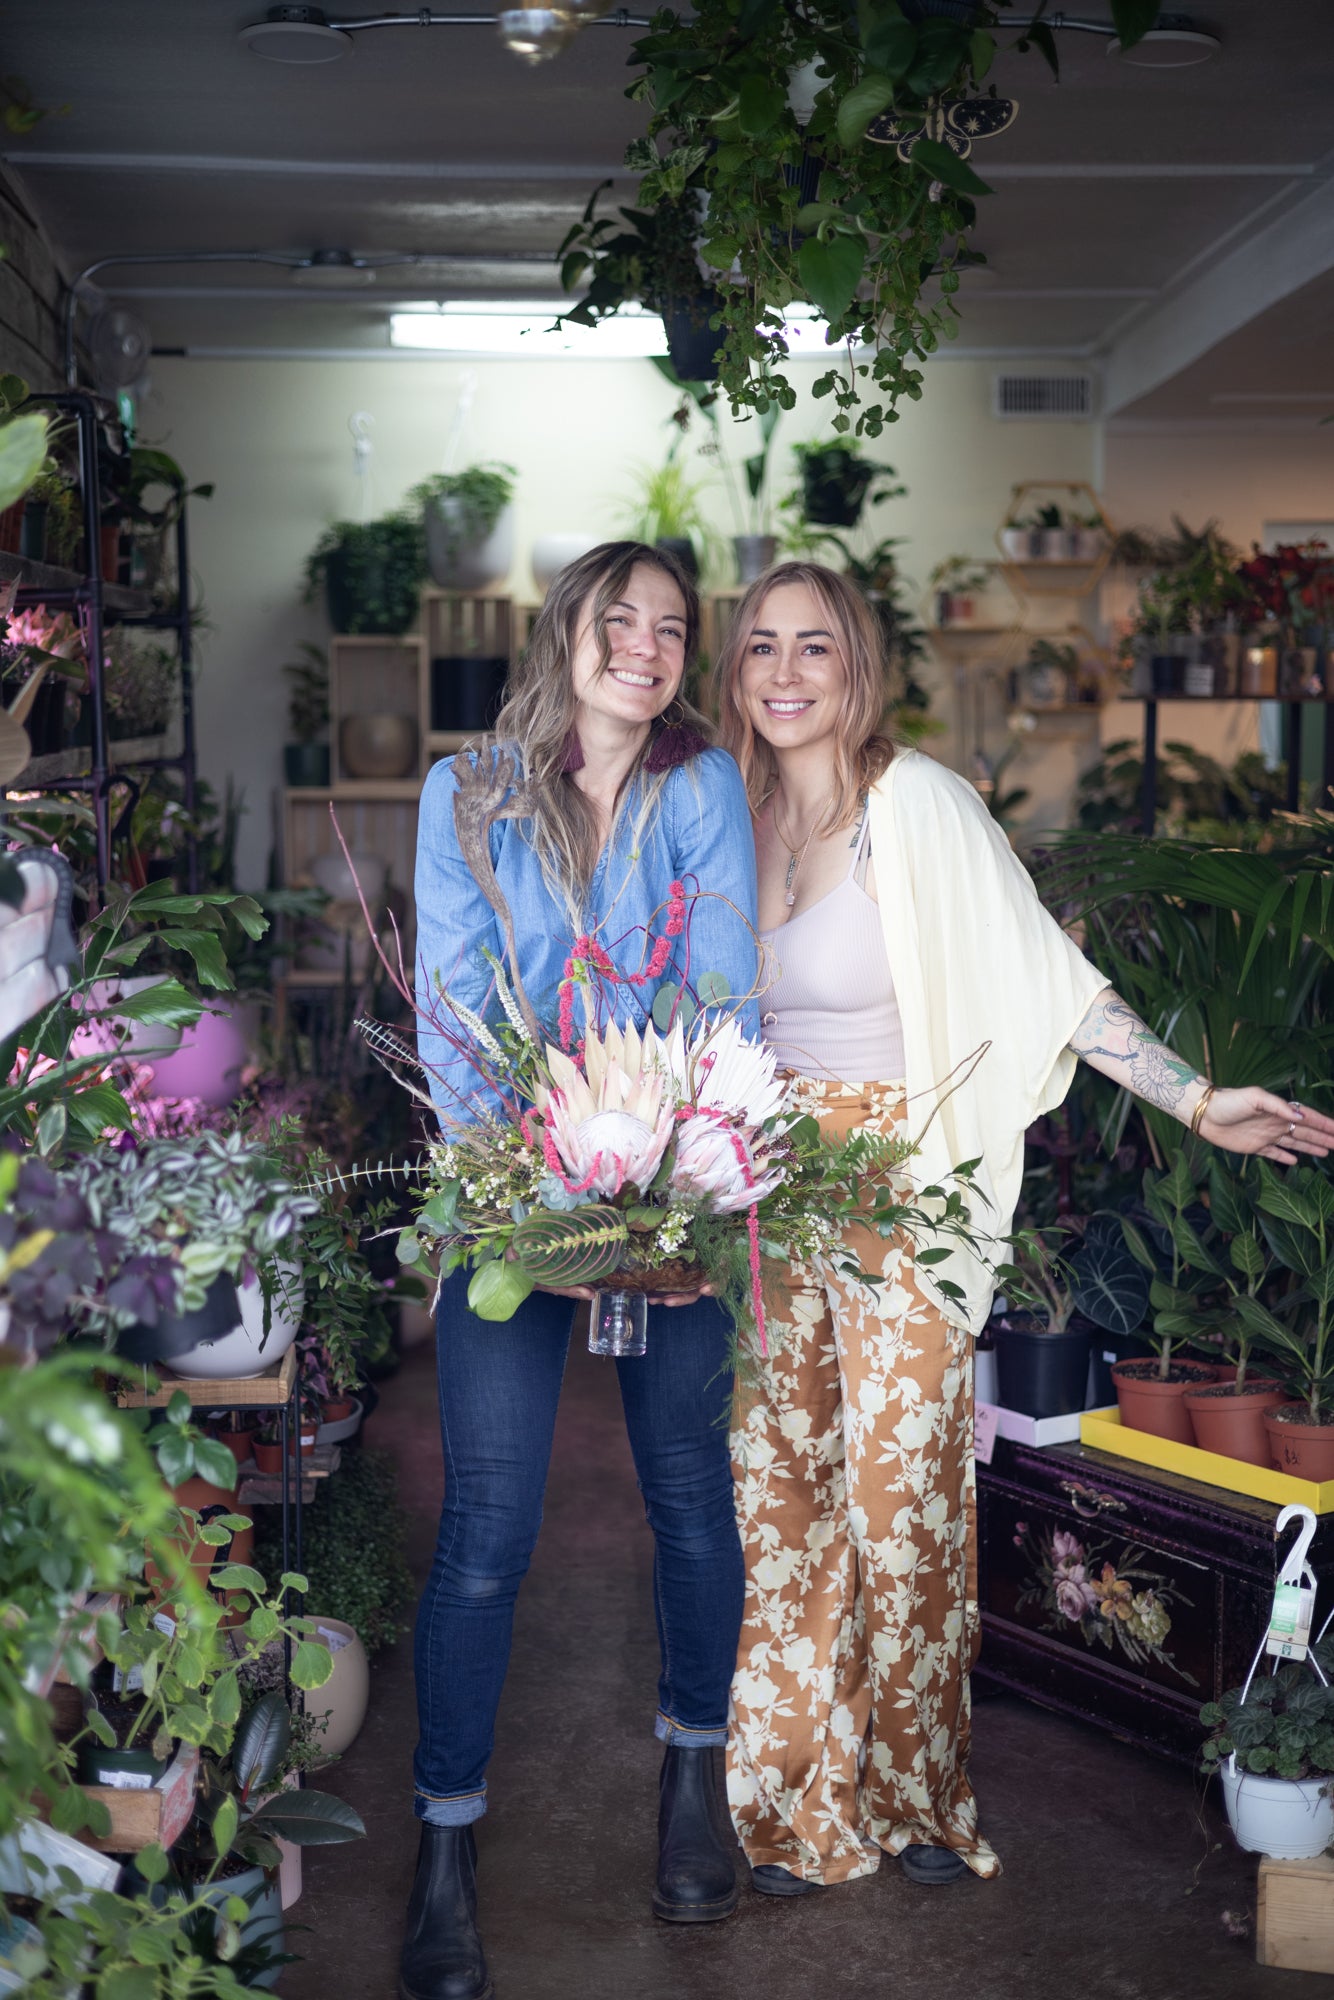 Sophie our florist & Meaghan the shop owner posing with one of their handmade bouquets.